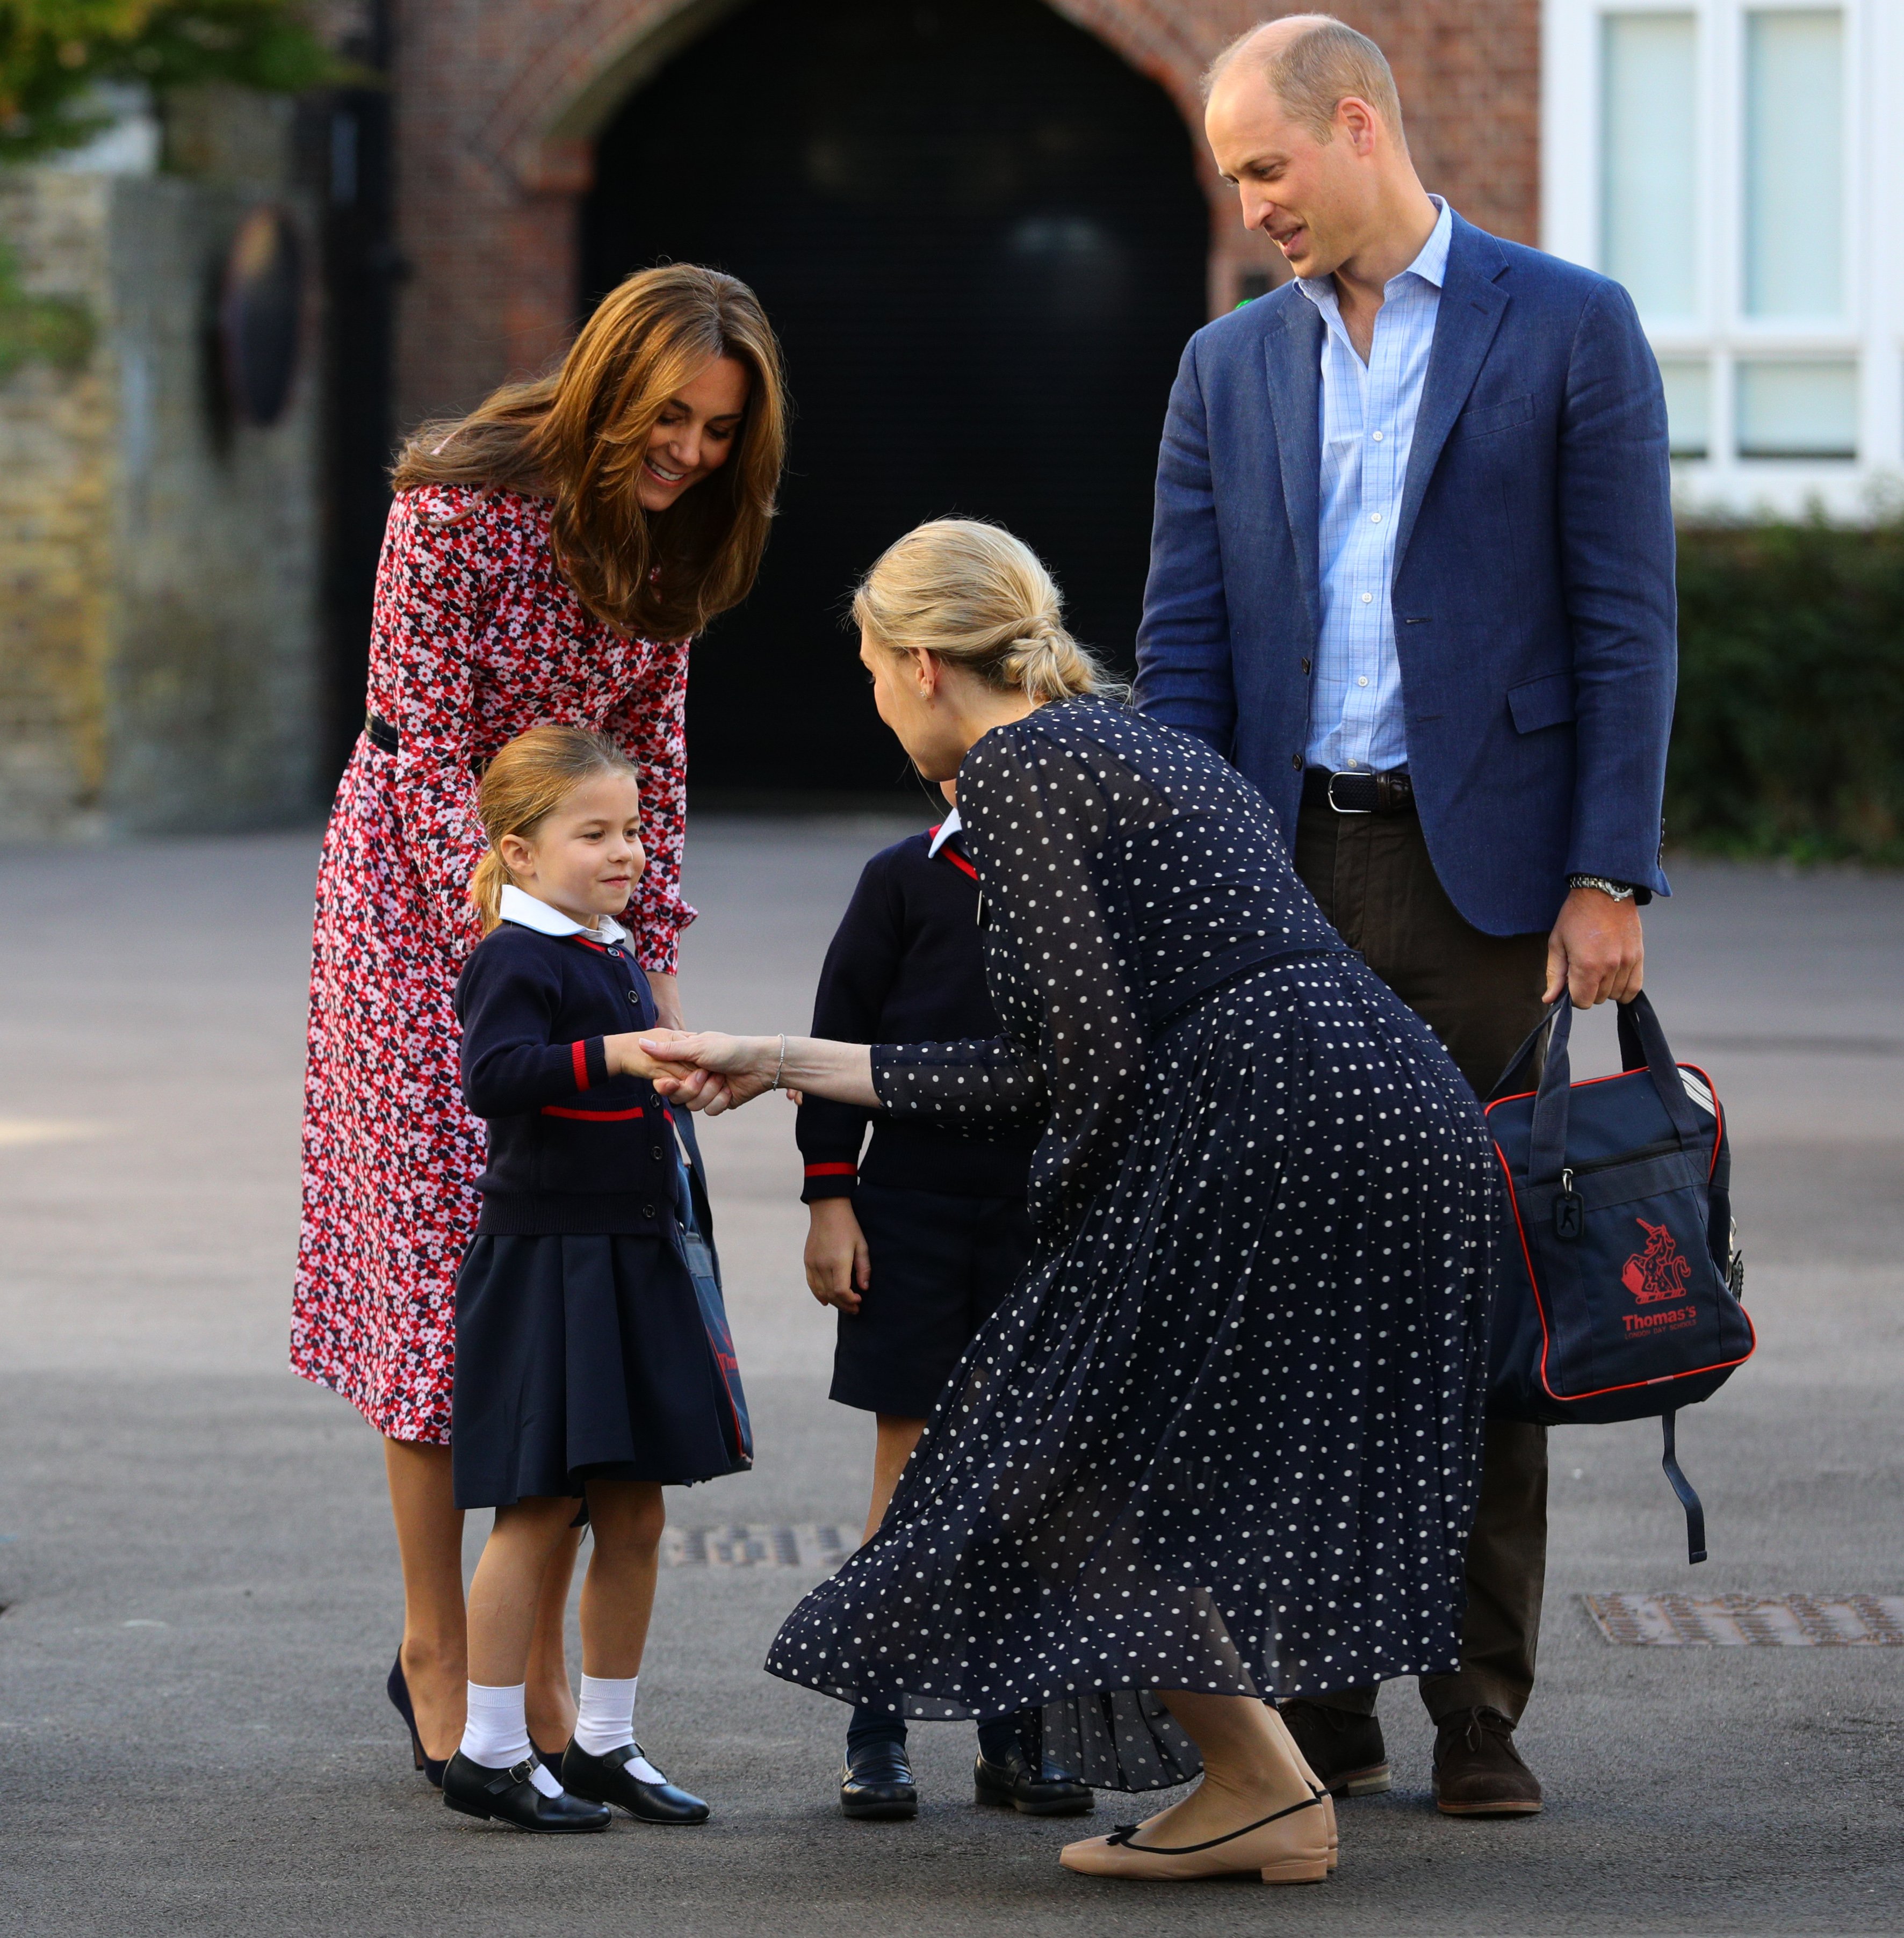 Helen Haslem pictured greeting Princess Charlotte as she arrives for her first day of school, and her parents Kate Middleton and Prince William, at Thomas's Battersea in London on September 5, 2019 in London, England. / Source: Getty Images